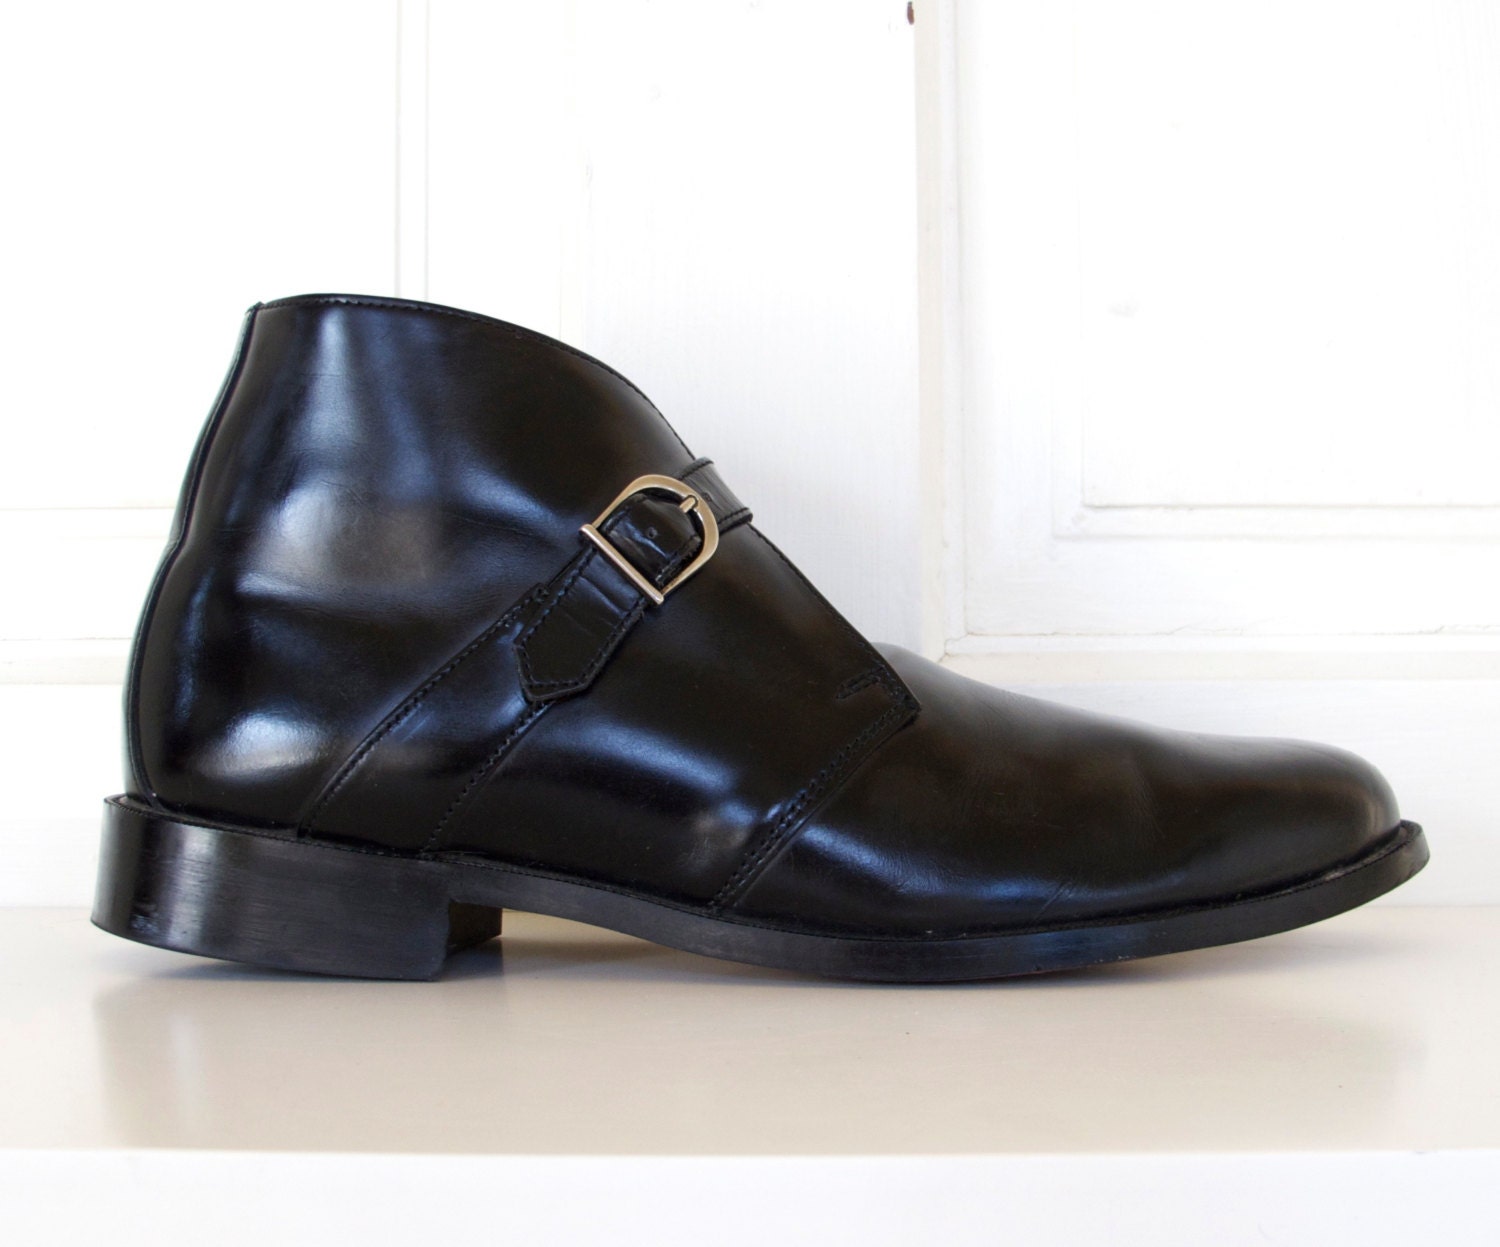 Men's Black Leather Buckle Boots / Polished Leather Dress